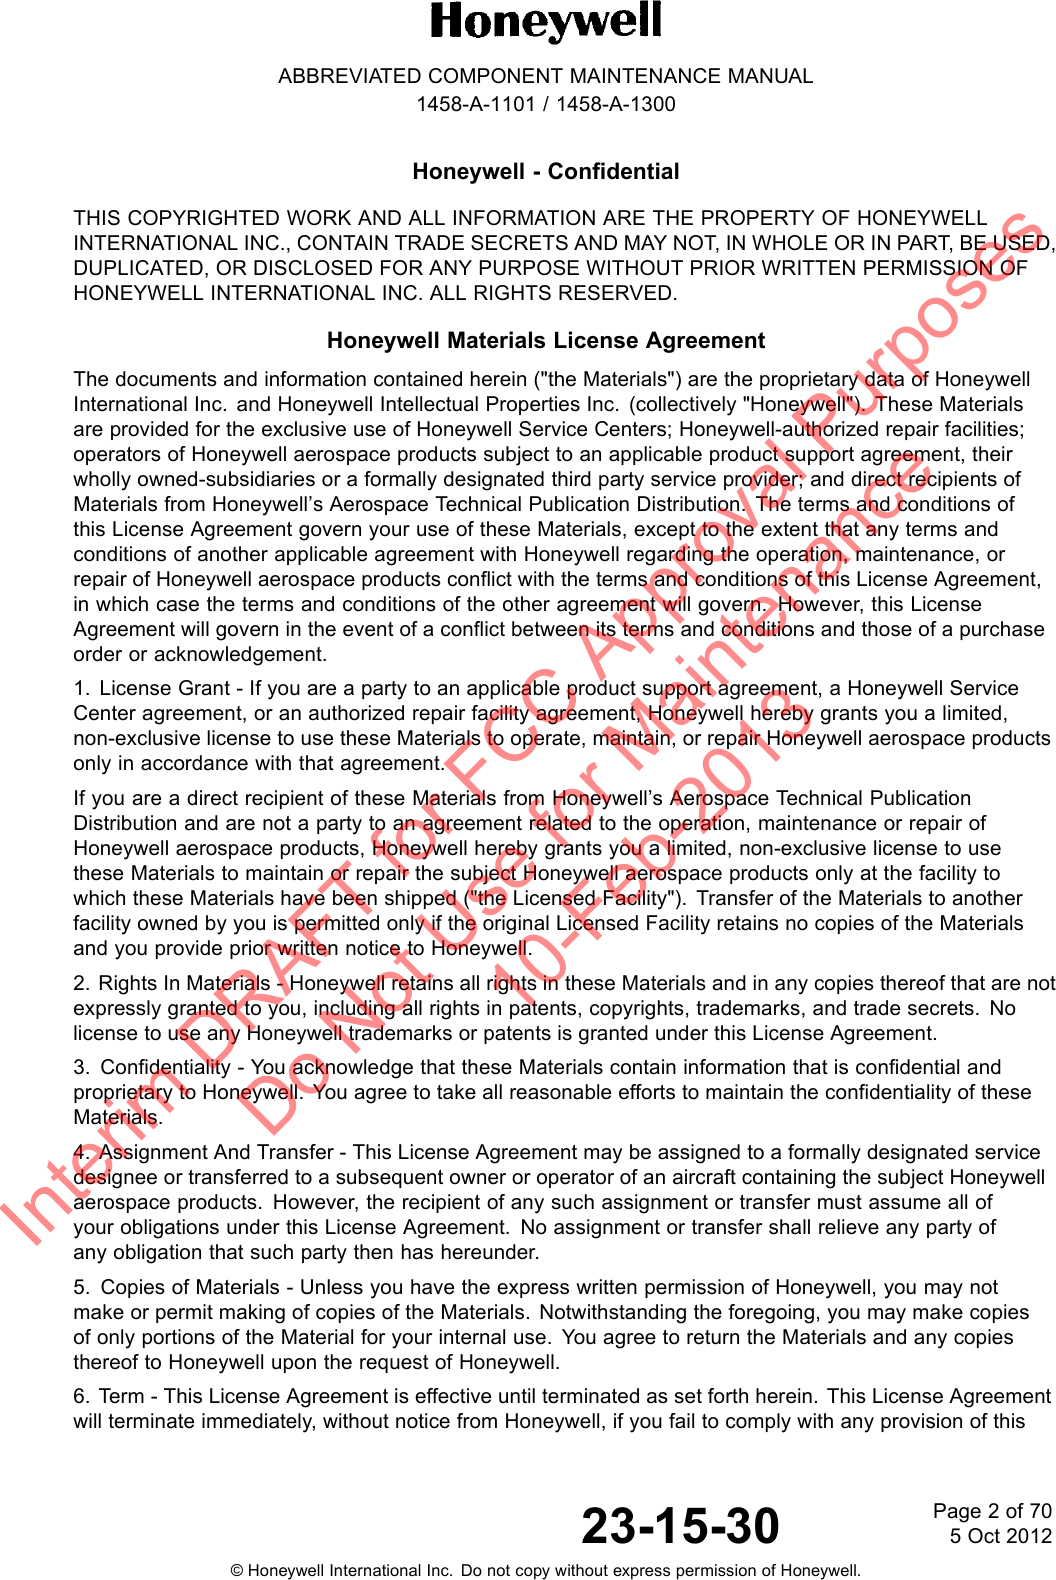 ABBREVIATED COMPONENT MAINTENANCE MANUAL1458-A-1101 / 1458-A-1300Honeywell - ConfidentialTHIS COPYRIGHTED WORK AND ALL INFORMATION ARE THE PROPERTY OF HONEYWELLINTERNATIONAL INC., CONTAIN TRADE SECRETS AND MAY NOT, IN WHOLE OR IN PART, BE USED,DUPLICATED, OR DISCLOSED FOR ANY PURPOSE WITHOUT PRIOR WRITTEN PERMISSION OFHONEYWELL INTERNATIONAL INC. ALL RIGHTS RESERVED.Honeywell Materials License AgreementThe documents and information contained herein (&quot;the Materials&quot;) are the proprietary data of HoneywellInternational Inc. and Honeywell Intellectual Properties Inc. (collectively &quot;Honeywell&quot;). These Materialsare provided for the exclusive use of Honeywell Service Centers; Honeywell-authorized repair facilities;operators of Honeywell aerospace products subject to an applicable product support agreement, theirwholly owned-subsidiaries or a formally designated third party service provider; and direct recipients ofMaterials from Honeywell’s Aerospace Technical Publication Distribution. The terms and conditions ofthis License Agreement govern your use of these Materials, except to the extent that any terms andconditions of another applicable agreement with Honeywell regarding the operation, maintenance, orrepair of Honeywell aerospace products conflict with the terms and conditions of this License Agreement,in which case the terms and conditions of the other agreement will govern. However, this LicenseAgreement will govern in the event of a conflict between its terms and conditions and those of a purchaseorder or acknowledgement.1. License Grant - If you are a party to an applicable product support agreement, a Honeywell ServiceCenter agreement, or an authorized repair facility agreement, Honeywell hereby grants you a limited,non-exclusive license to use these Materials to operate, maintain, or repair Honeywell aerospace productsonly in accordance with that agreement.If you are a direct recipient of these Materials from Honeywell’s Aerospace Technical PublicationDistribution and are not a party to an agreement related to the operation, maintenance or repair ofHoneywell aerospace products, Honeywell hereby grants you a limited, non-exclusive license to usethese Materials to maintain or repair the subject Honeywell aerospace products only at the facility towhich these Materials have been shipped (&quot;the Licensed Facility&quot;). Transfer of the Materials to anotherfacility owned by you is permitted only if the original Licensed Facility retains no copies of the Materialsand you provide prior written notice to Honeywell.2. Rights In Materials - Honeywell retains all rights in these Materials and in any copies thereof that are notexpressly granted to you, including all rights in patents, copyrights, trademarks, and trade secrets. Nolicense to use any Honeywell trademarks or patents is granted under this License Agreement.3. Confidentiality - You acknowledge that these Materials contain information that is confidential andproprietary to Honeywell. You agree to take all reasonable efforts to maintain the confidentiality of theseMaterials.4. Assignment And Transfer - This License Agreement may be assigned to a formally designated servicedesignee or transferred to a subsequent owner or operator of an aircraft containing the subject Honeywellaerospace products. However, the recipient of any such assignment or transfer must assume all ofyour obligations under this License Agreement. No assignment or transfer shall relieve any party ofany obligation that such party then has hereunder.5. Copies of Materials - Unless you have the express written permission of Honeywell, you may notmake or permit making of copies of the Materials. Notwithstanding the foregoing, you may make copiesof only portions of the Material for your internal use. You agree to return the Materials and any copiesthereof to Honeywell upon the request of Honeywell.6. Term - This License Agreement is effective until terminated as set forth herein. This License Agreementwill terminate immediately, without notice from Honeywell, if you fail to comply with any provision of this23-15-30 Page2of705 Oct 2012© Honeywell International Inc. Do not copy without express permission of Honeywell.Interim DRAFT for FCC Approval Purposes Do Not Use for Maintenance 10-Feb-2013